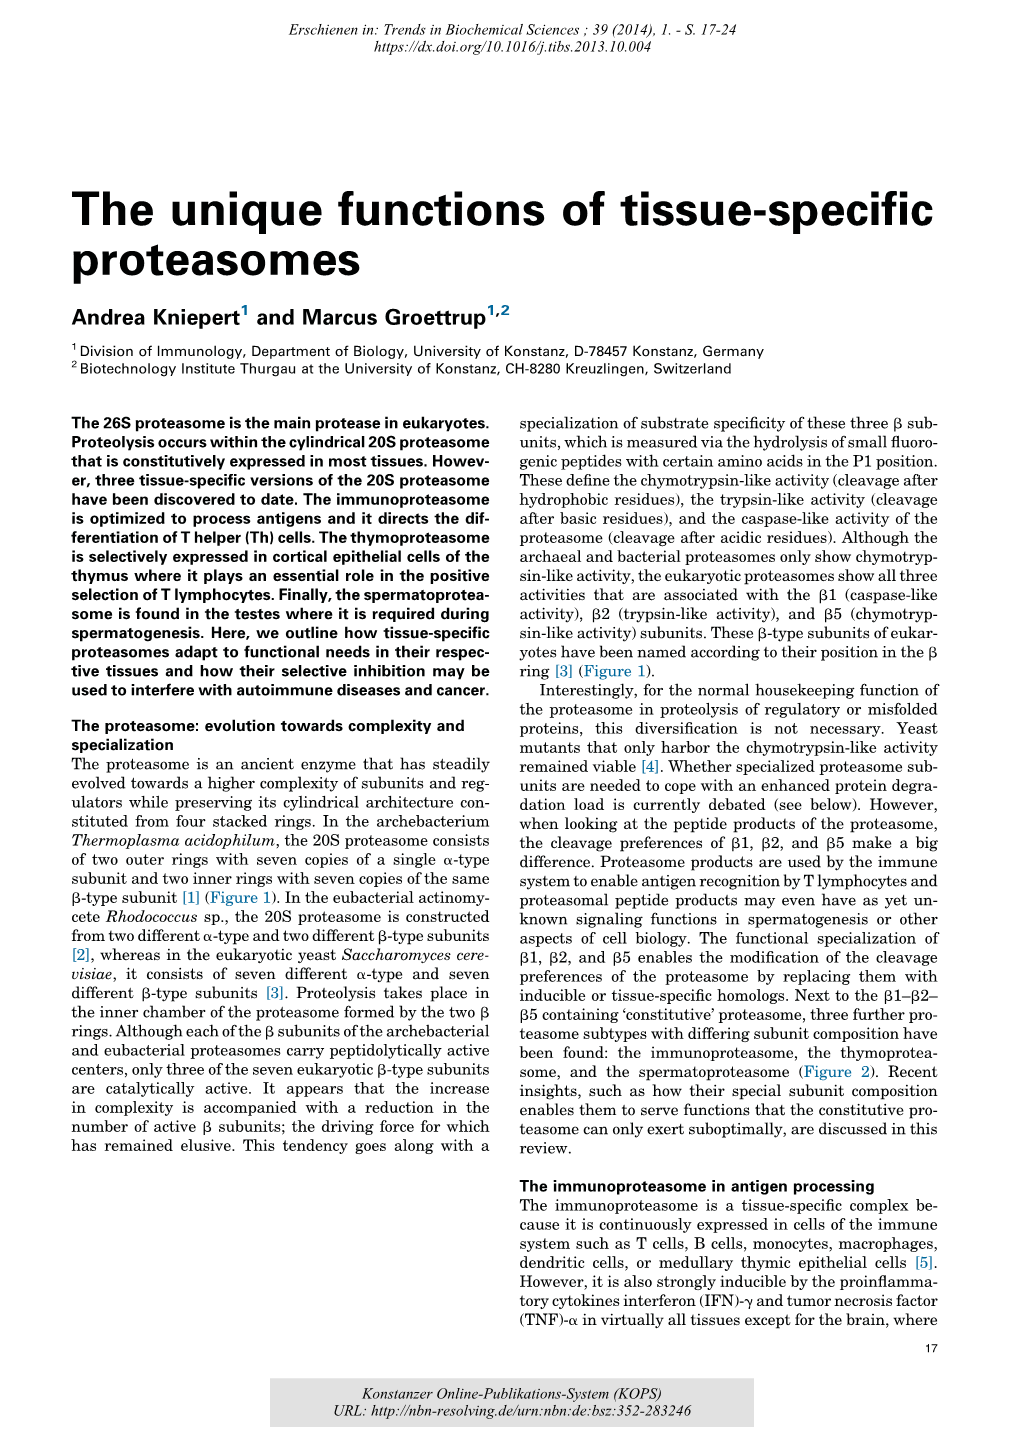 The Unique Functions of Tissue-Specific Proteasomes